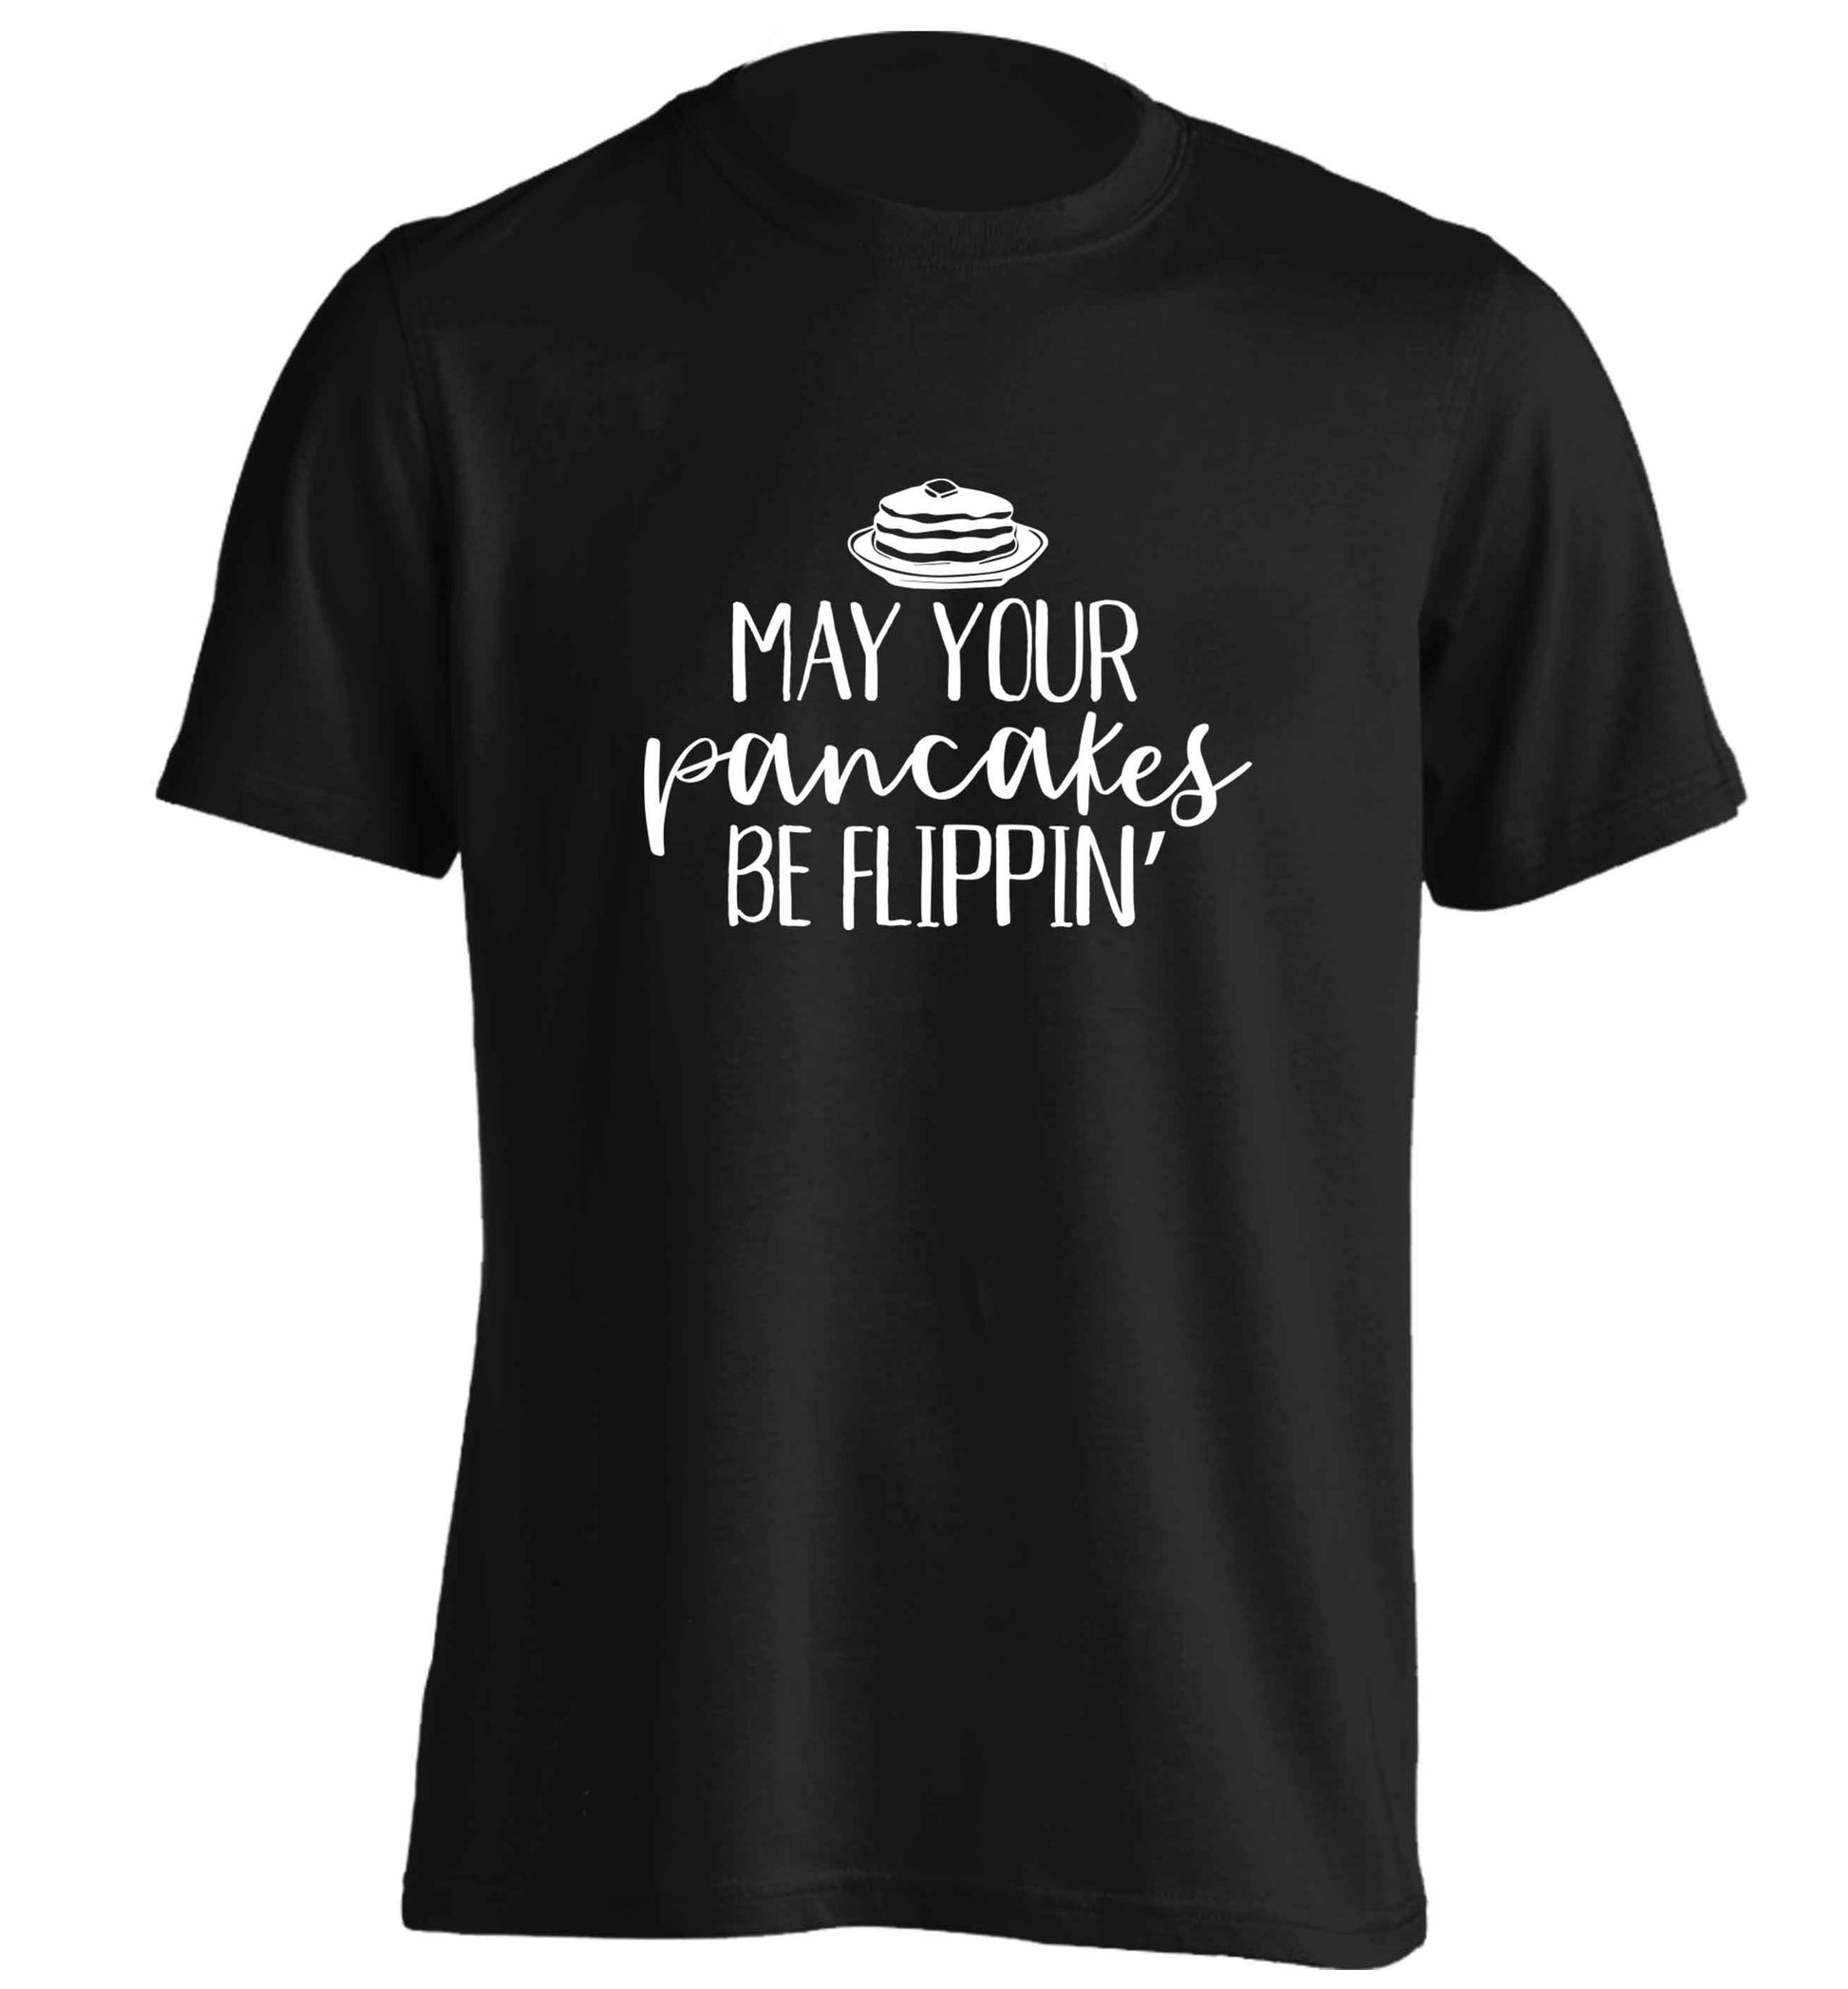 May your pancakes be flippin' adults unisex black Tshirt 2XL